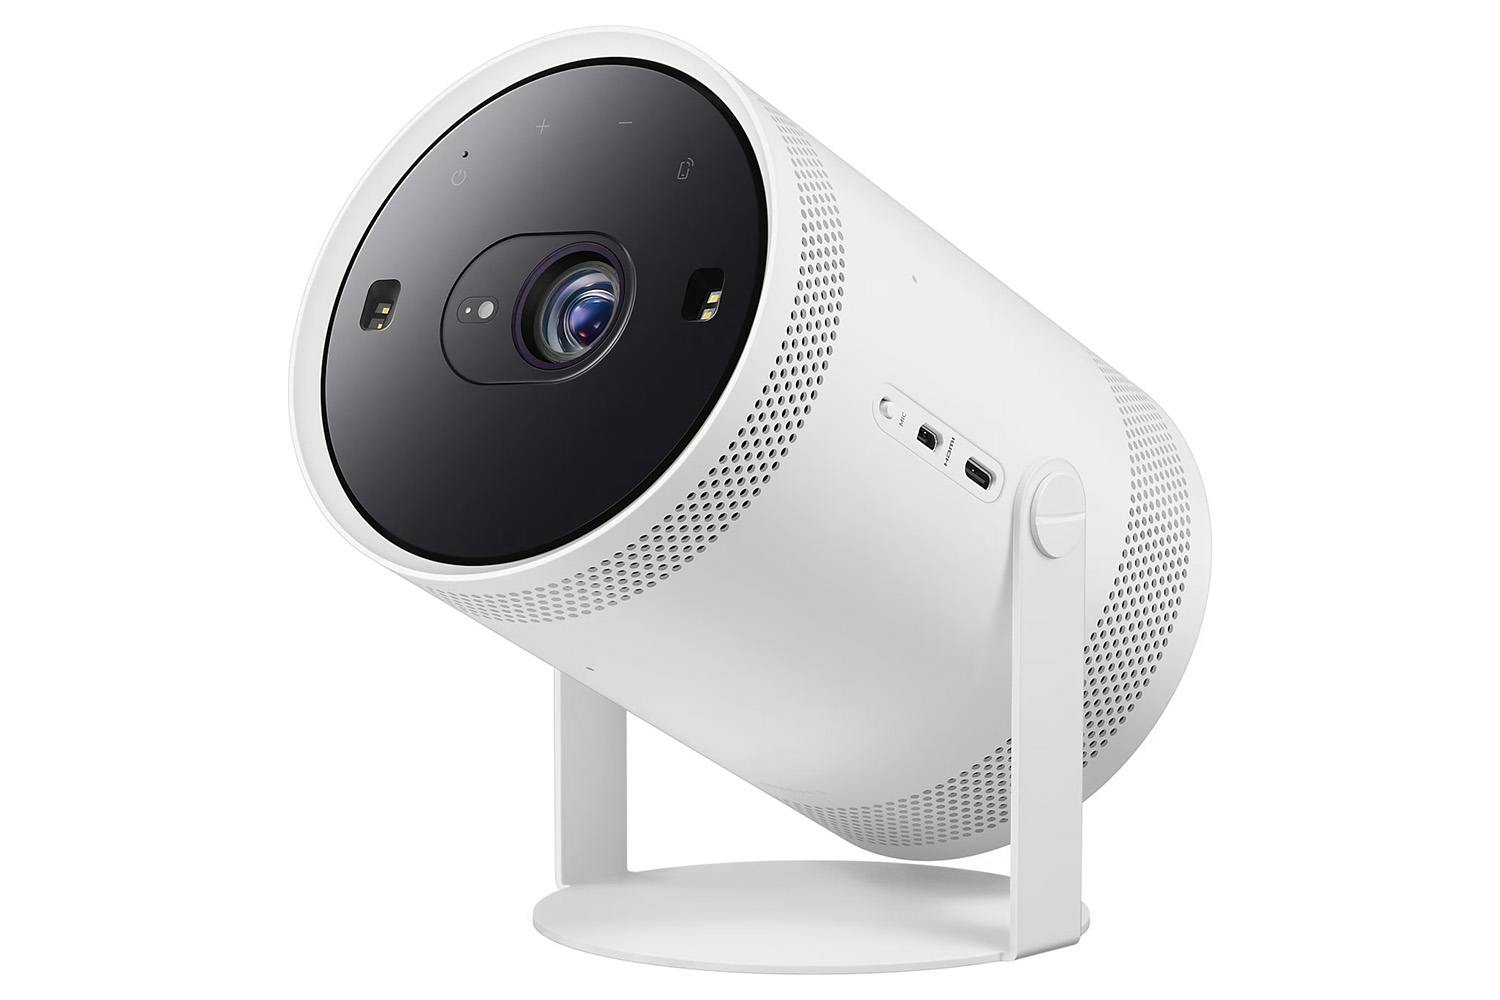 Weeprojector.fr Review: Legit or Scam?